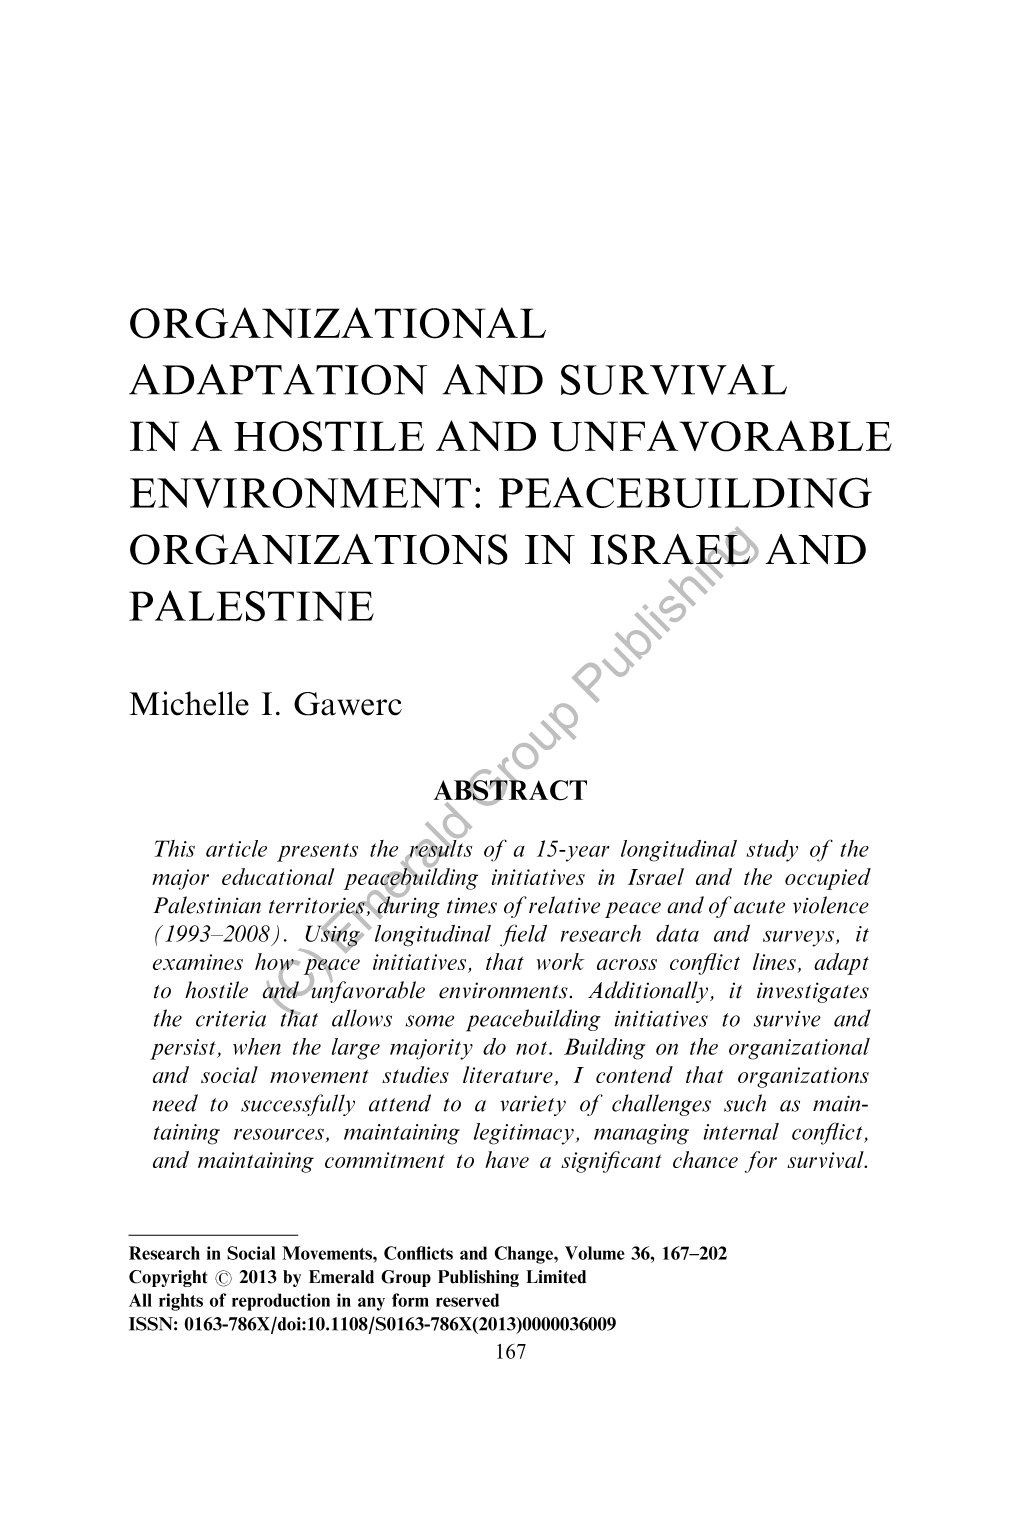 Organizational Adaptation and Survival in a Hostile and Unfavorable Environment: Peacebuilding Organizations in Israel and Palestine